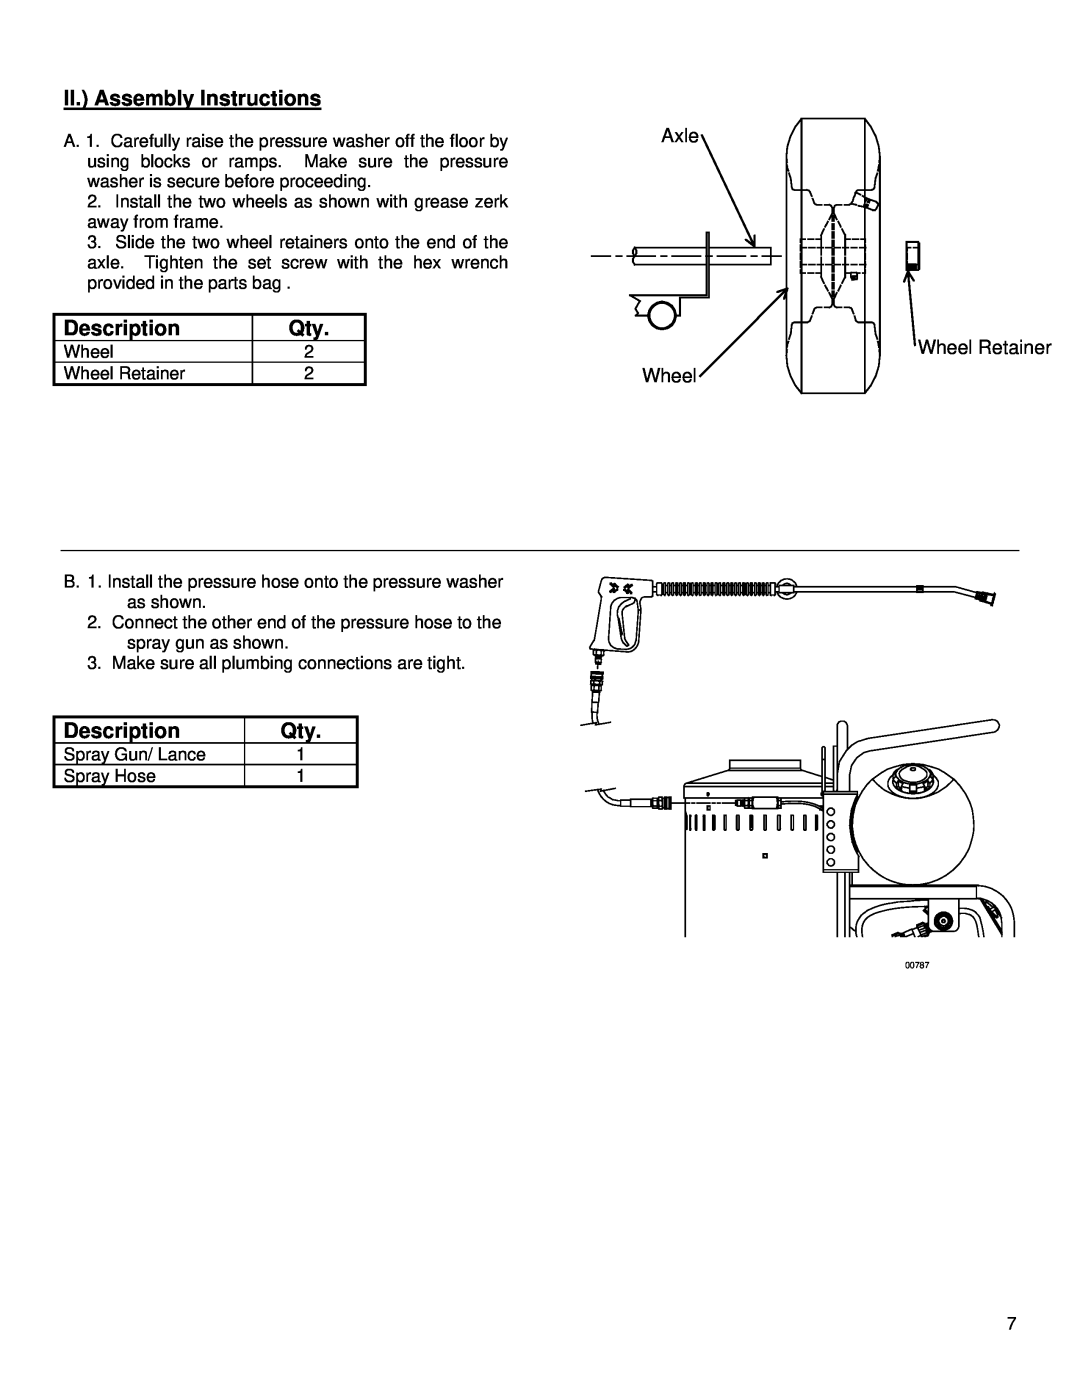 North Star MHOTPWR specifications II. Assembly Instructions, Description, Axle, Wheel Retainer Wheel 